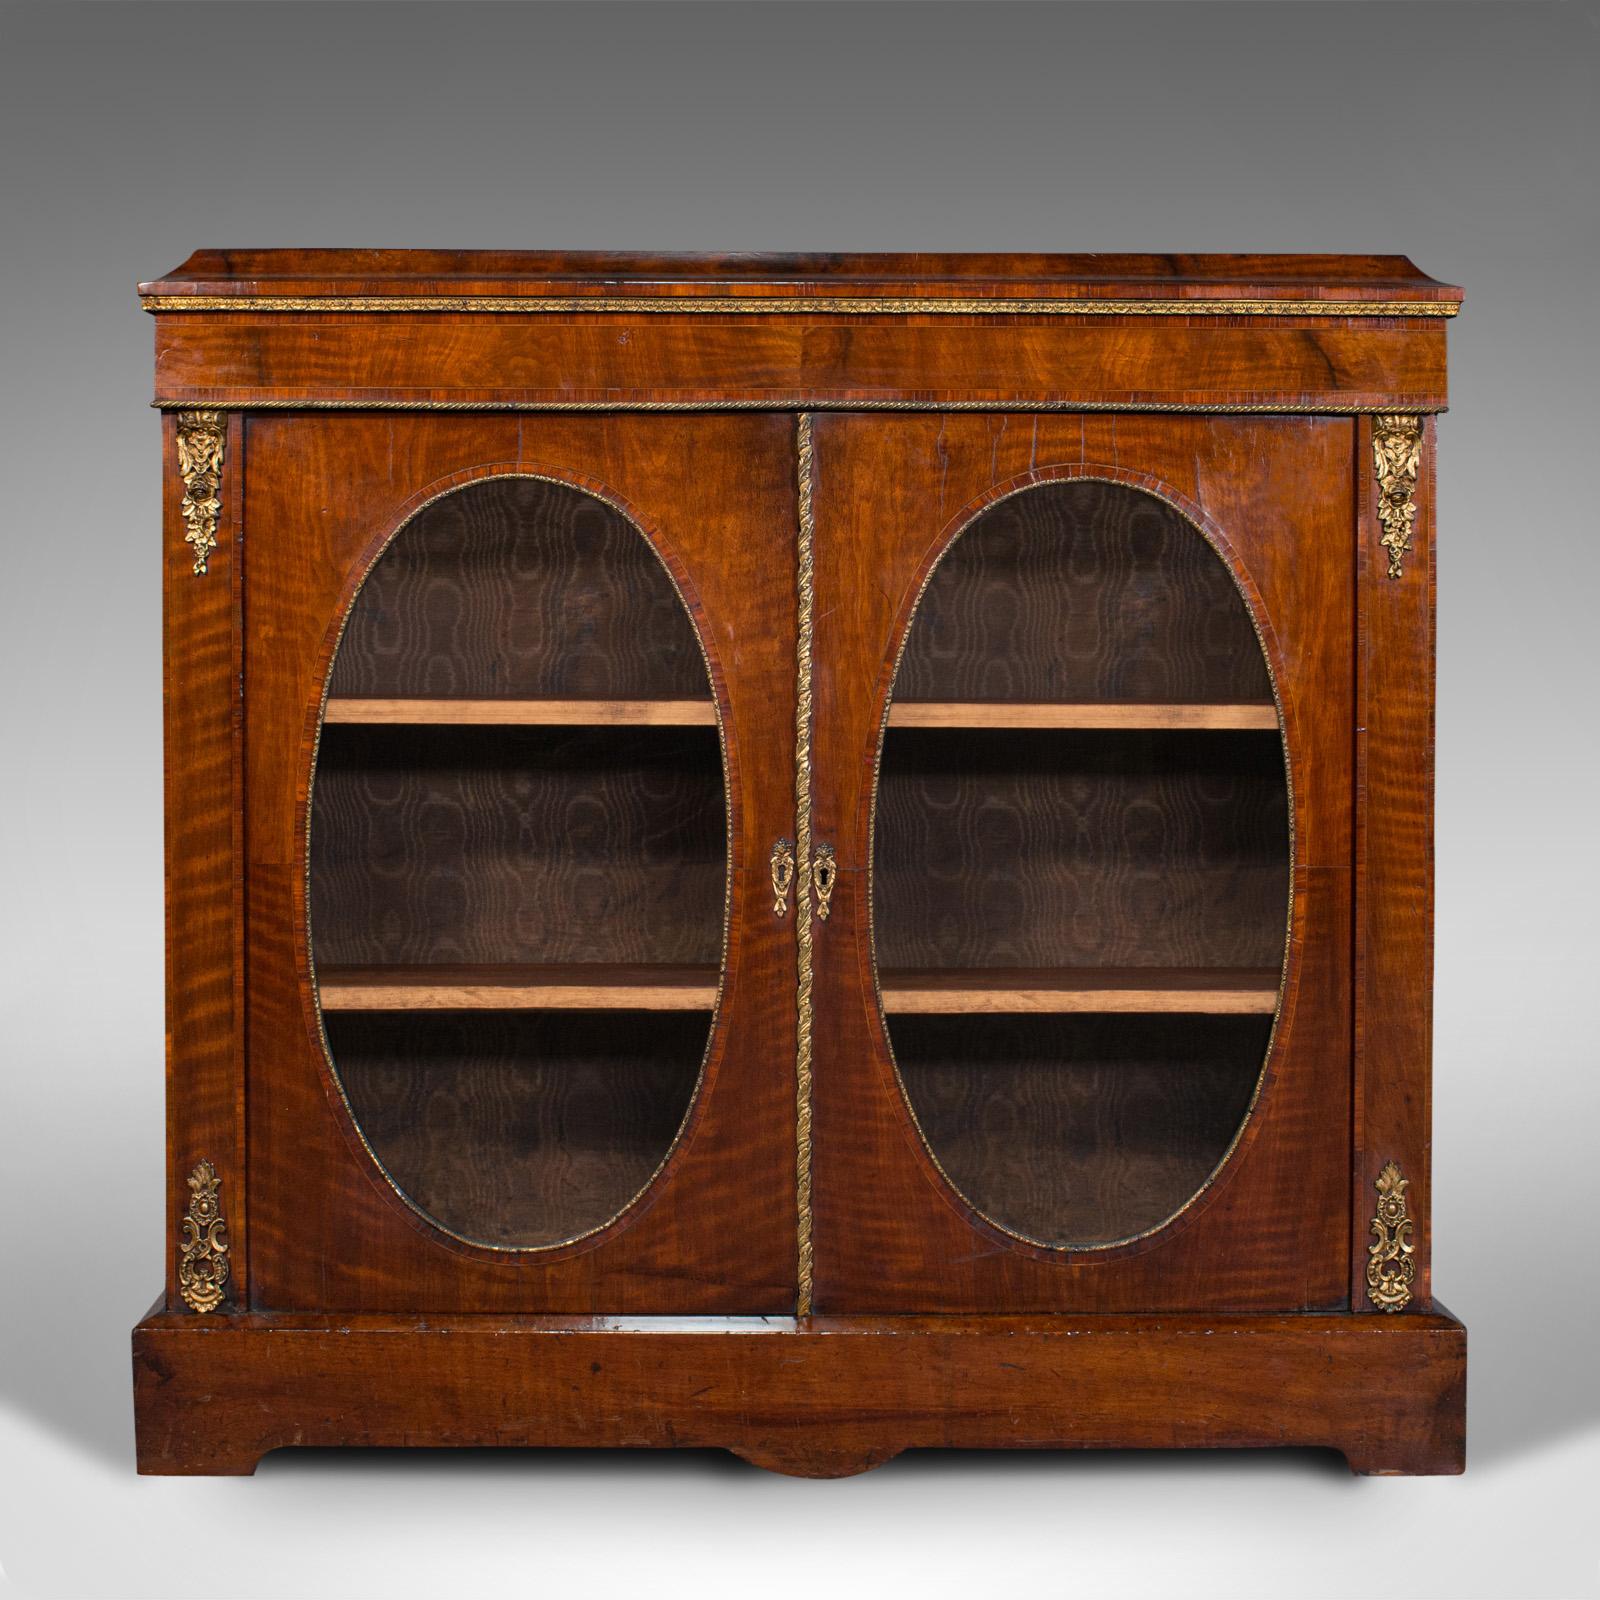 This is an antique display bookcase. An English, walnut, boxwood inlay and ormolu dressed Empire cabinet, dating to the Regency period, circa 1820.

Attractive example of Regency period library furniture
Displaying a desirable aged patina and in